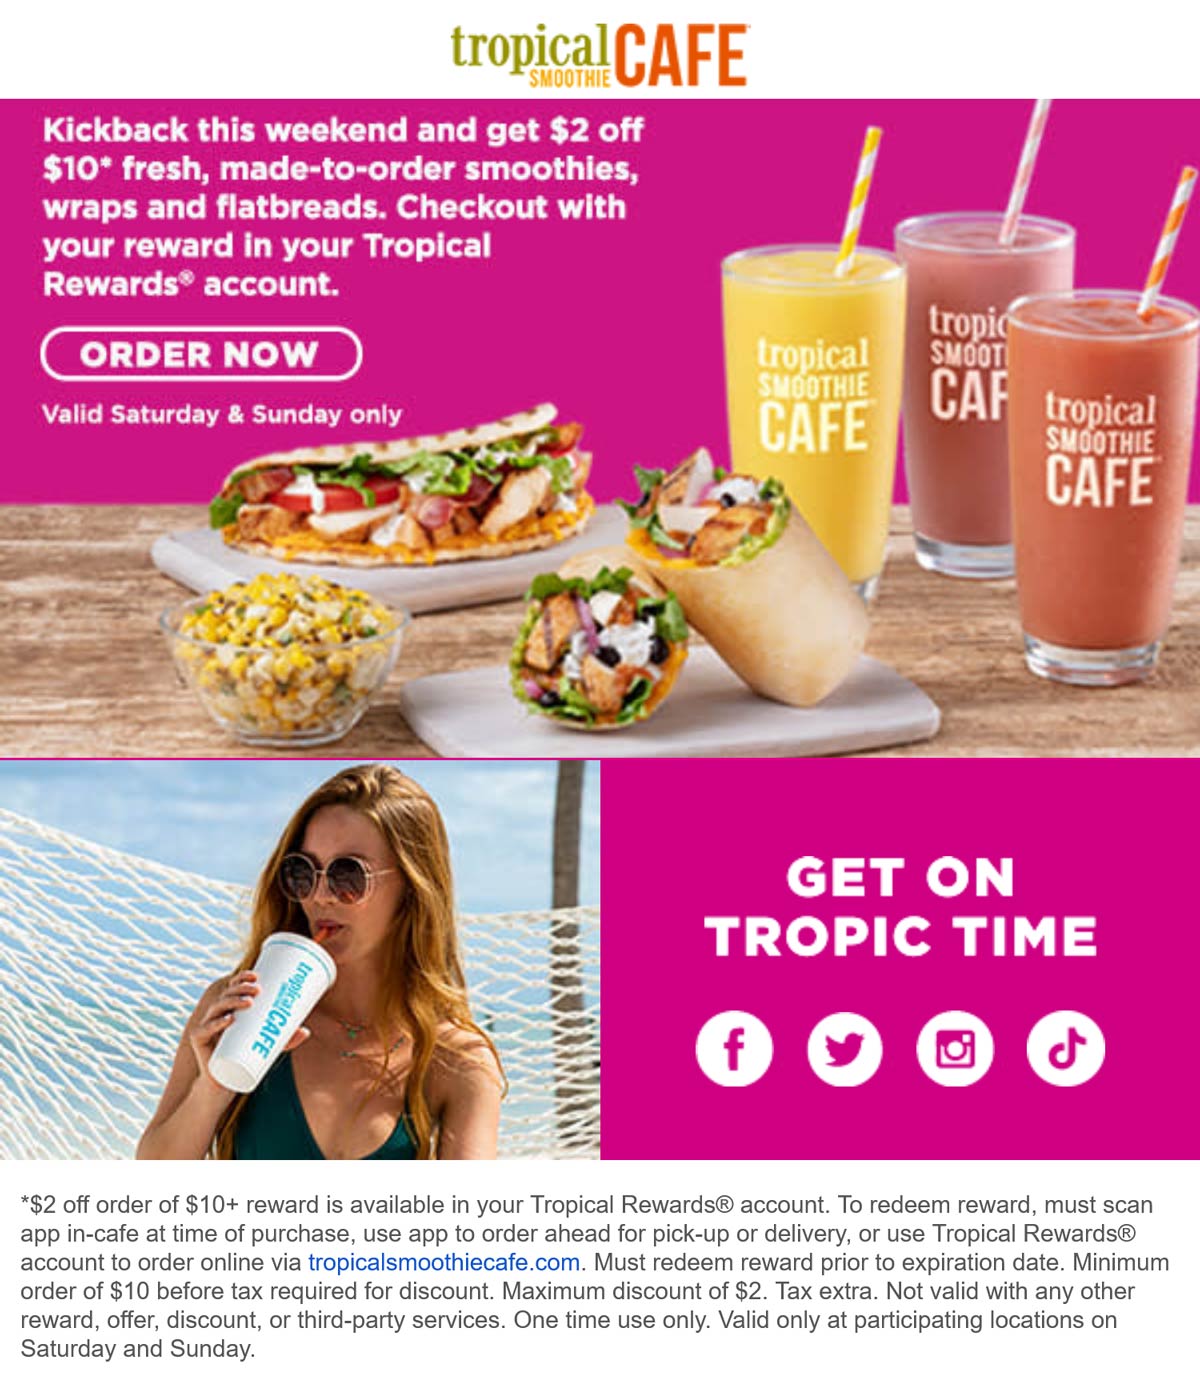 Tropical Smoothie Cafe restaurants Coupon  $2 off $10 via rewards at Tropical Smoothie Cafe #tropicalsmoothiecafe 